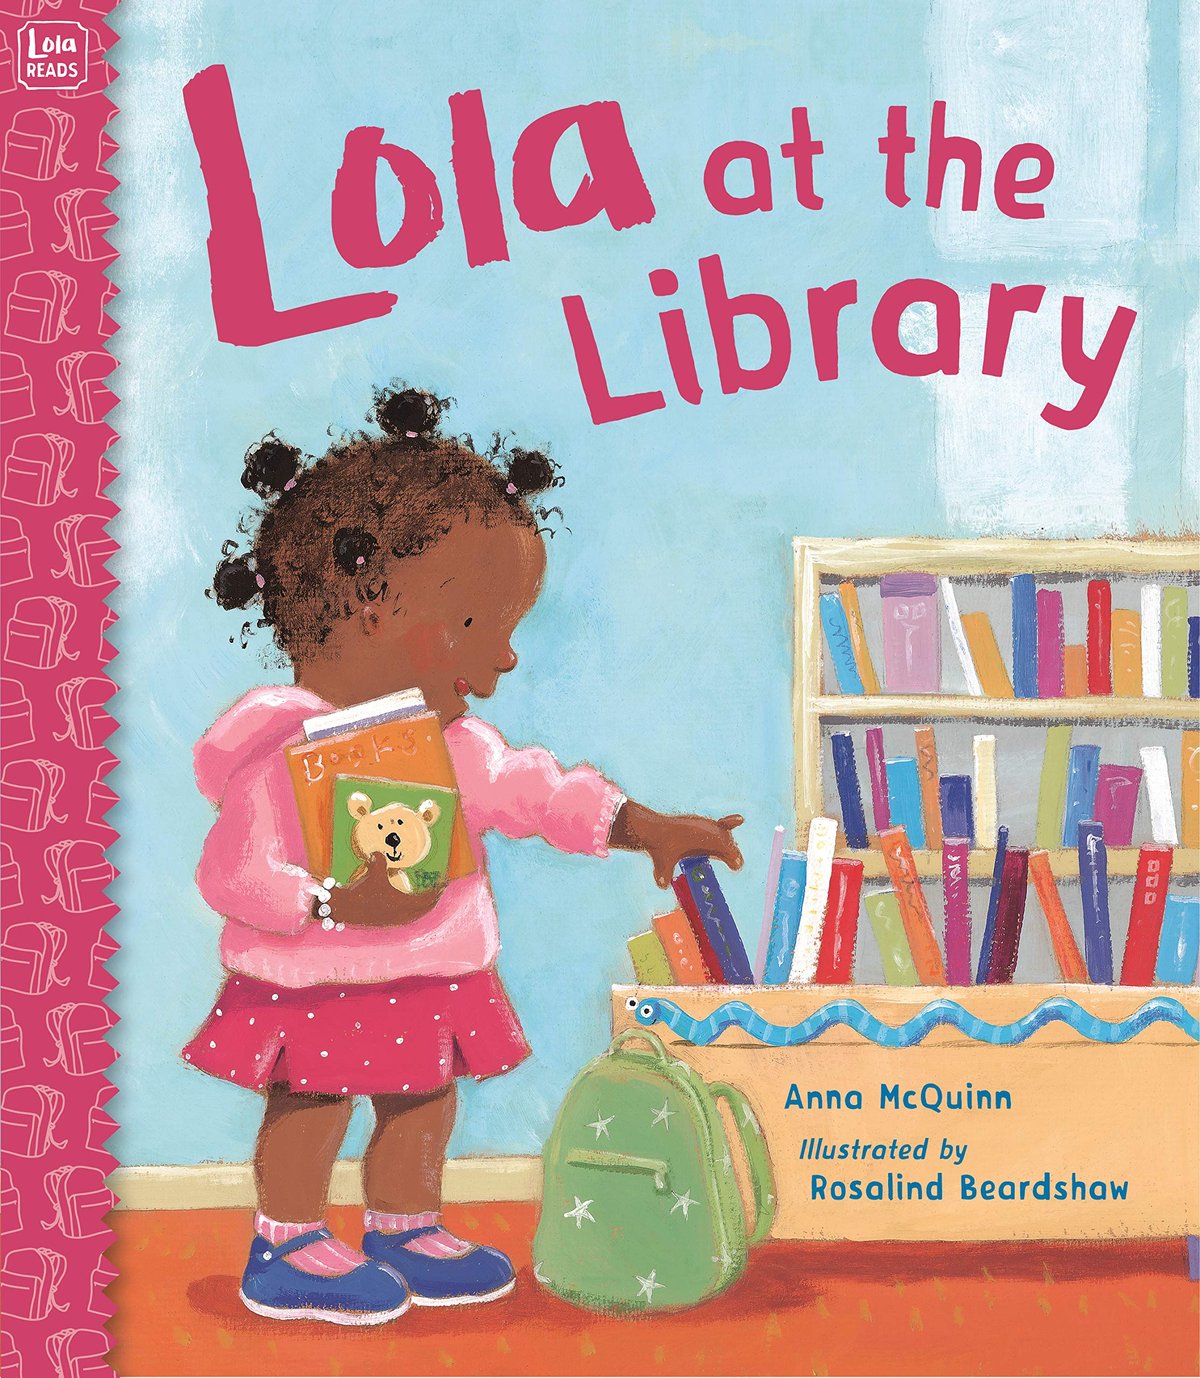 Image of Lola at the Library 978-1580891424